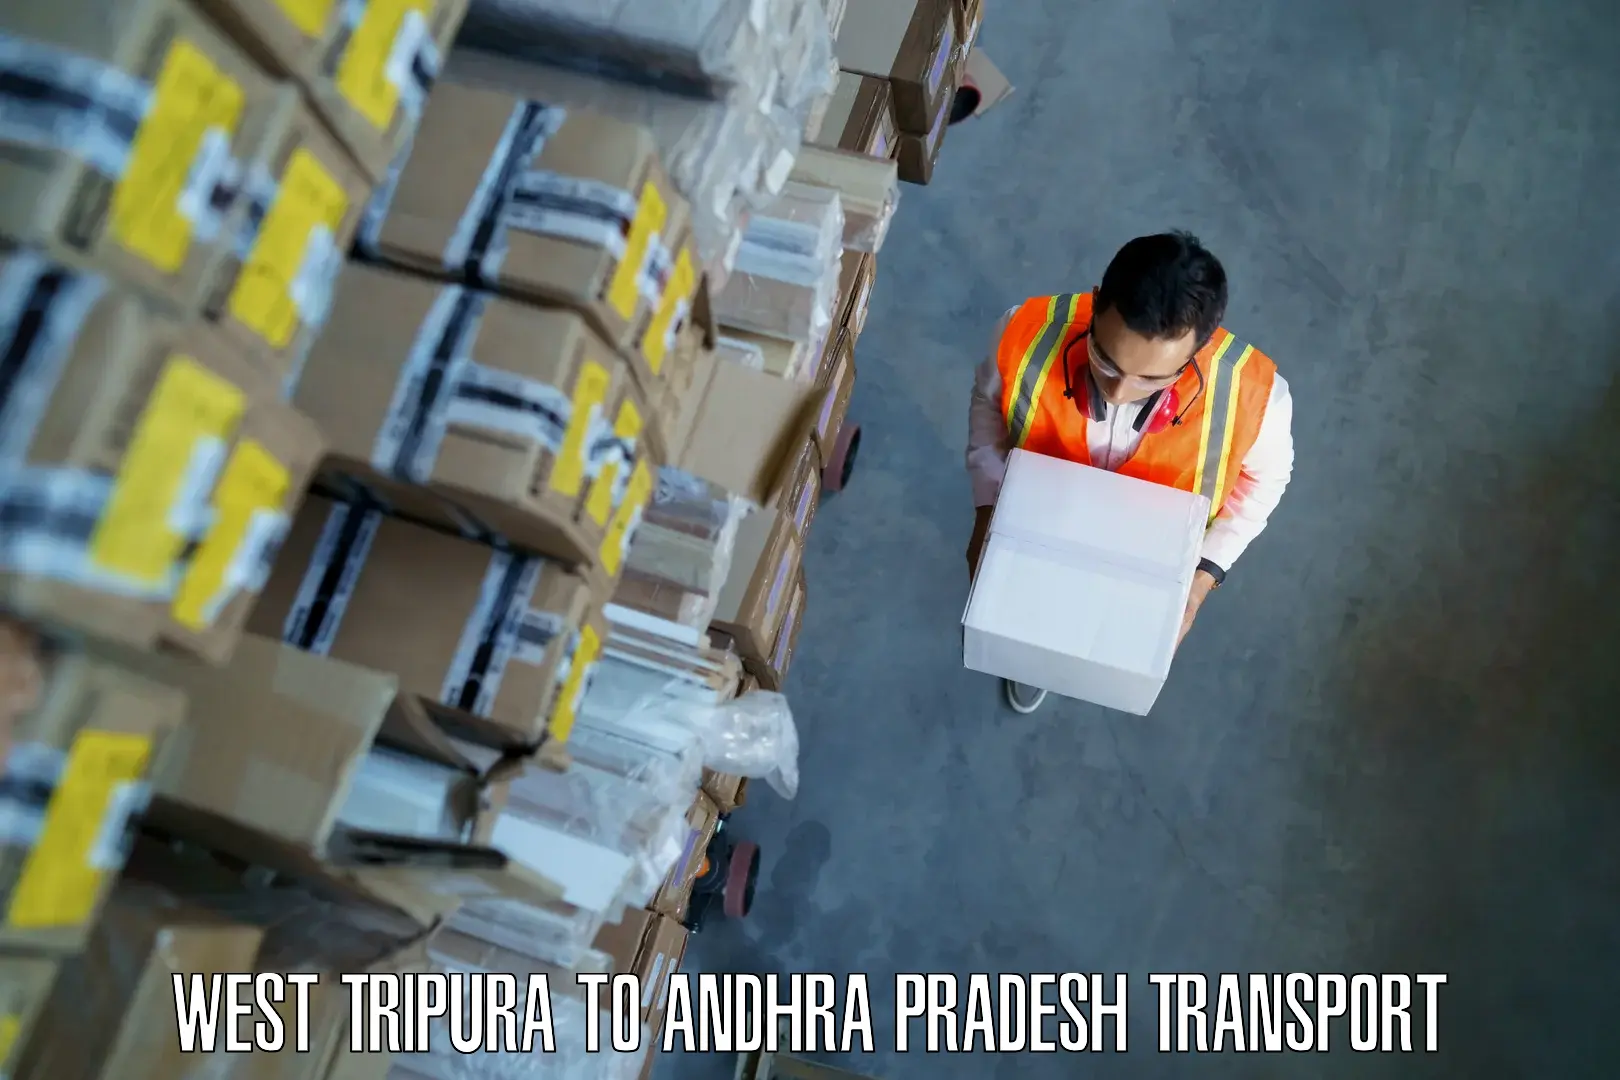 Delivery service West Tripura to Tripuranthakam